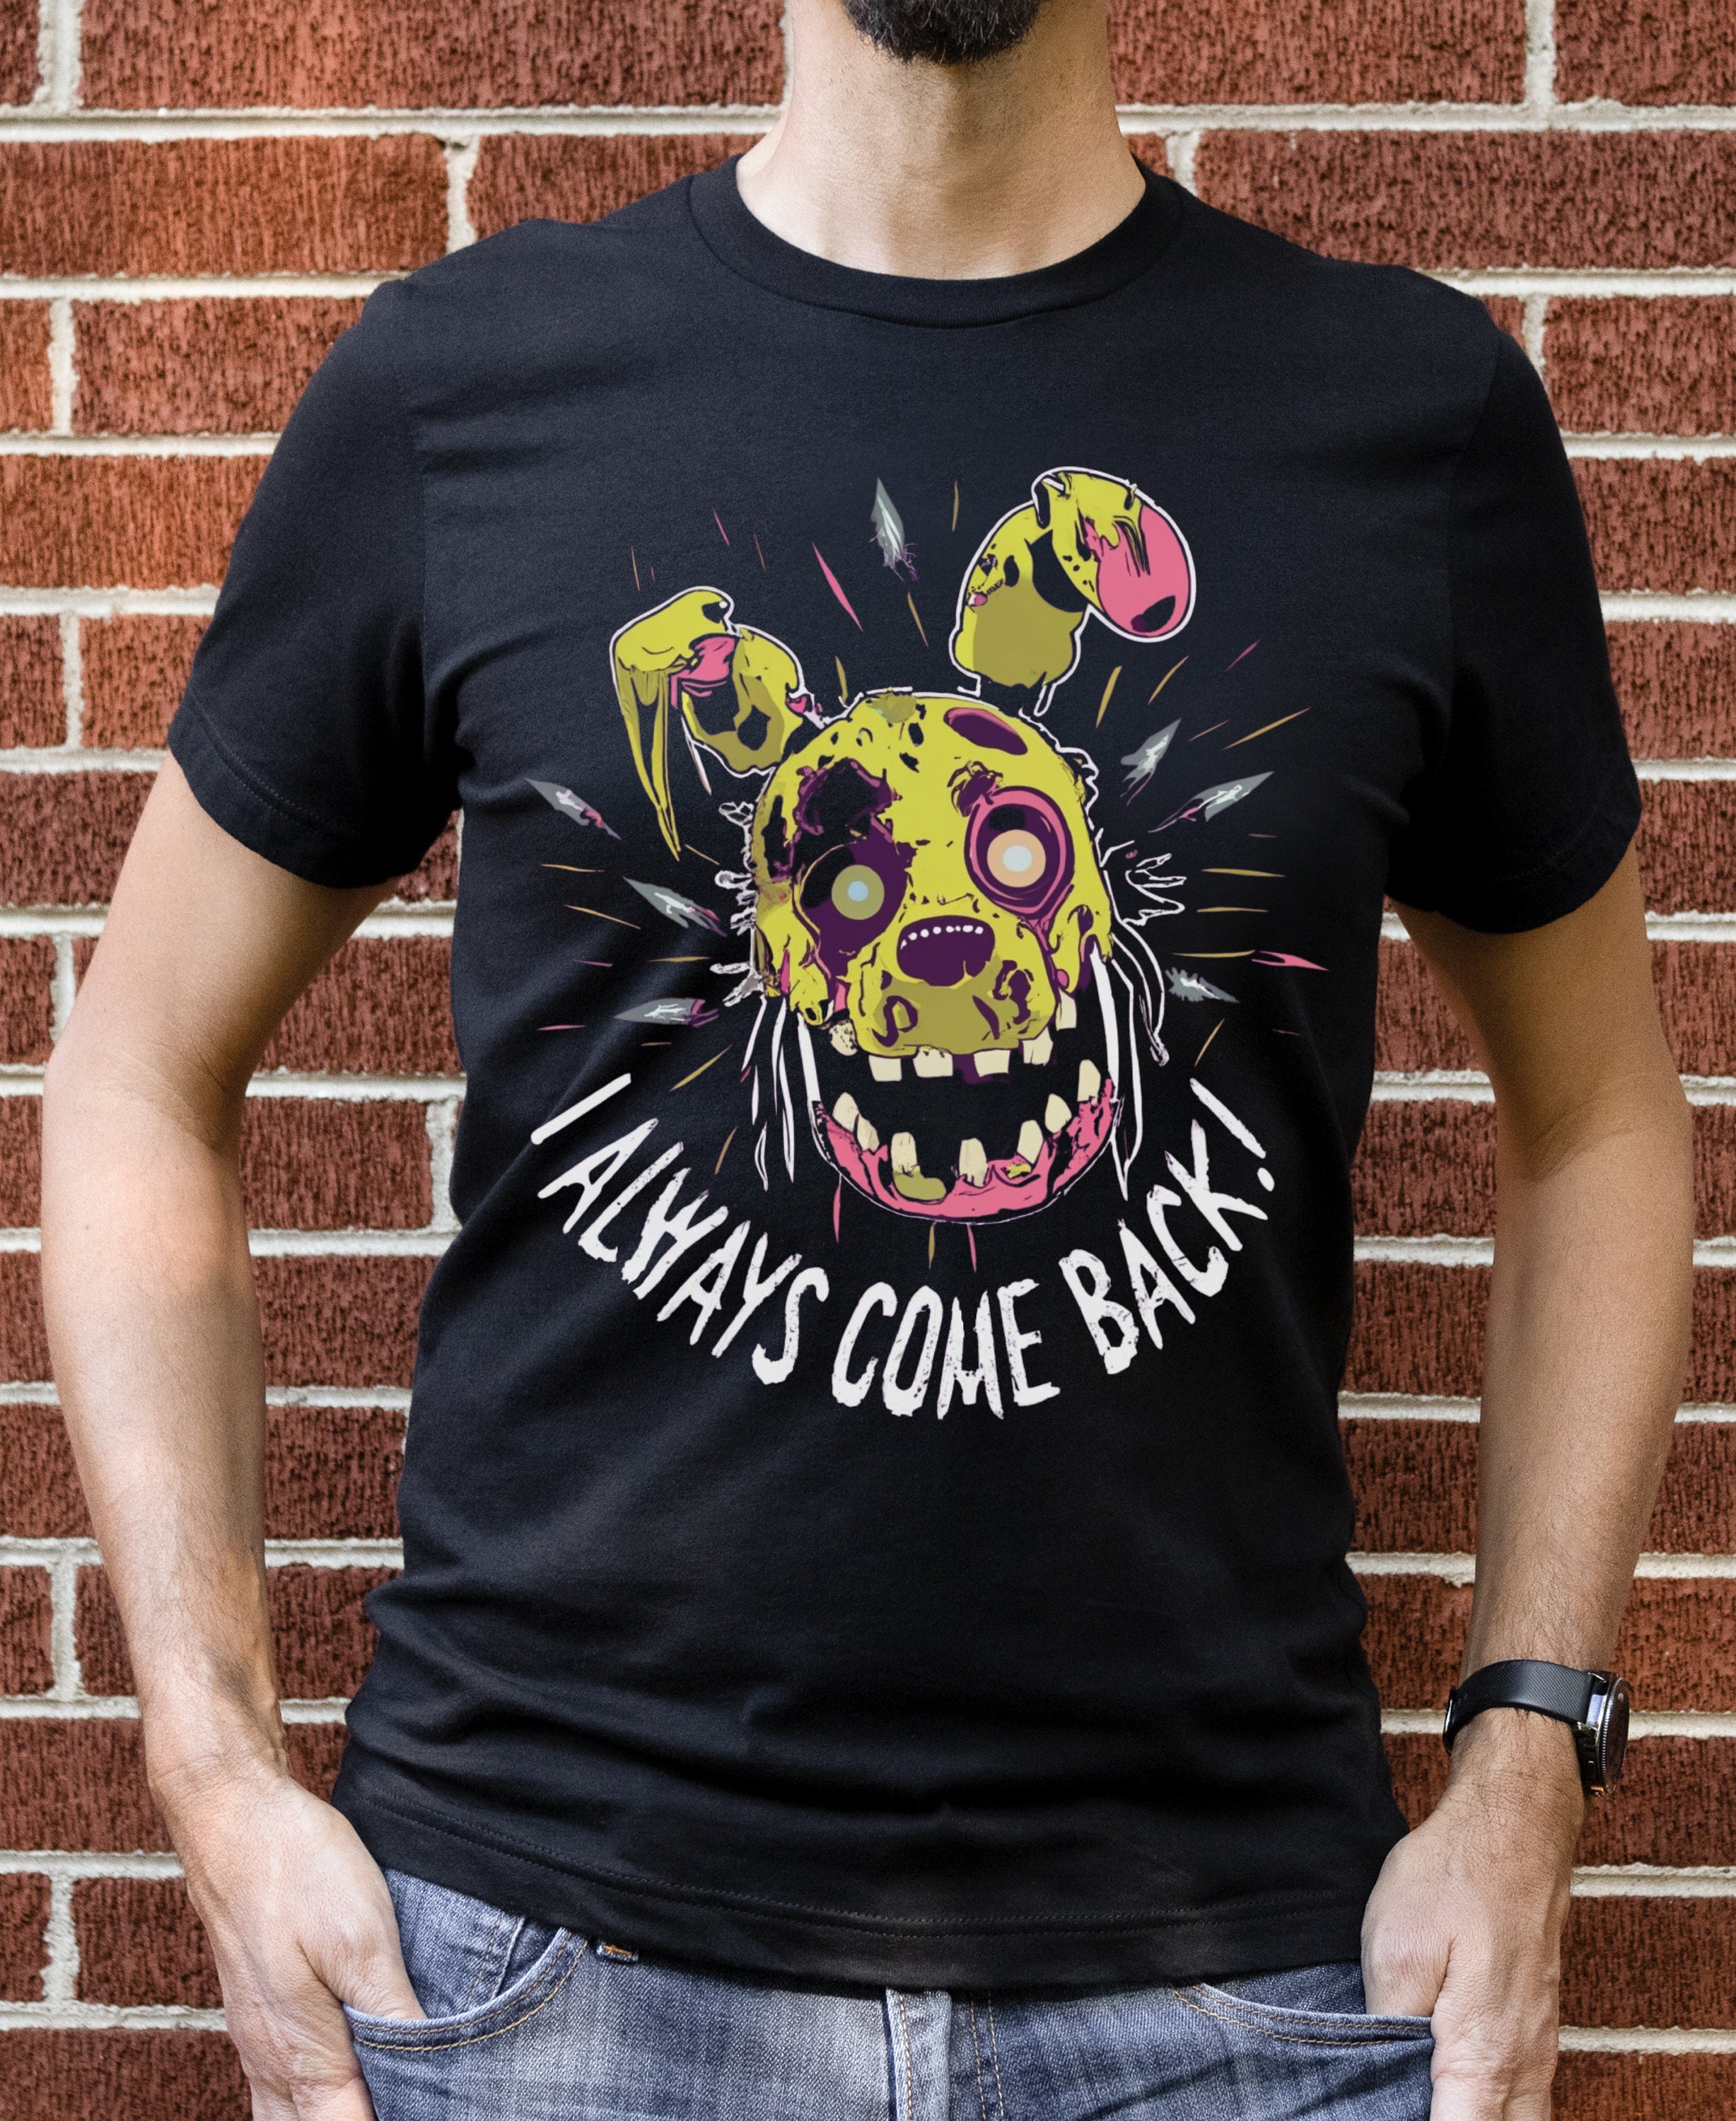 Five Nights At Freddy's 3 Springtrap Jumbo Graphic T-Shirt